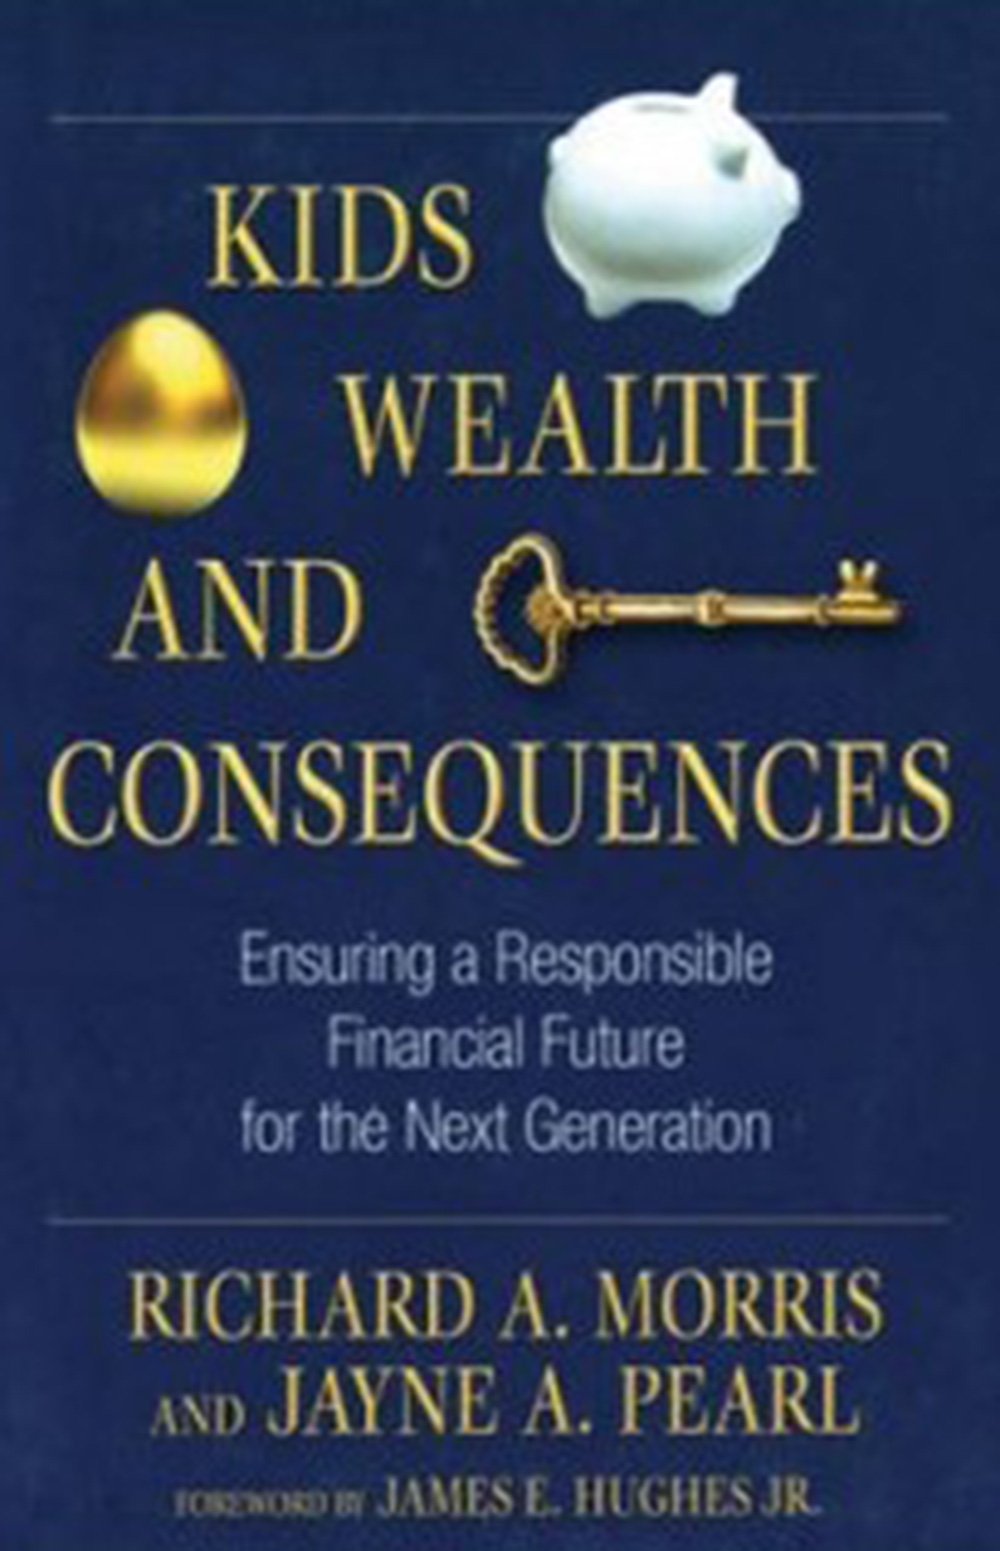 //www.demetriscurry.com/wp-content/uploads/2019/03/Kids_-Wealth_-and-Consequences-by-Richard-Morris.jpg